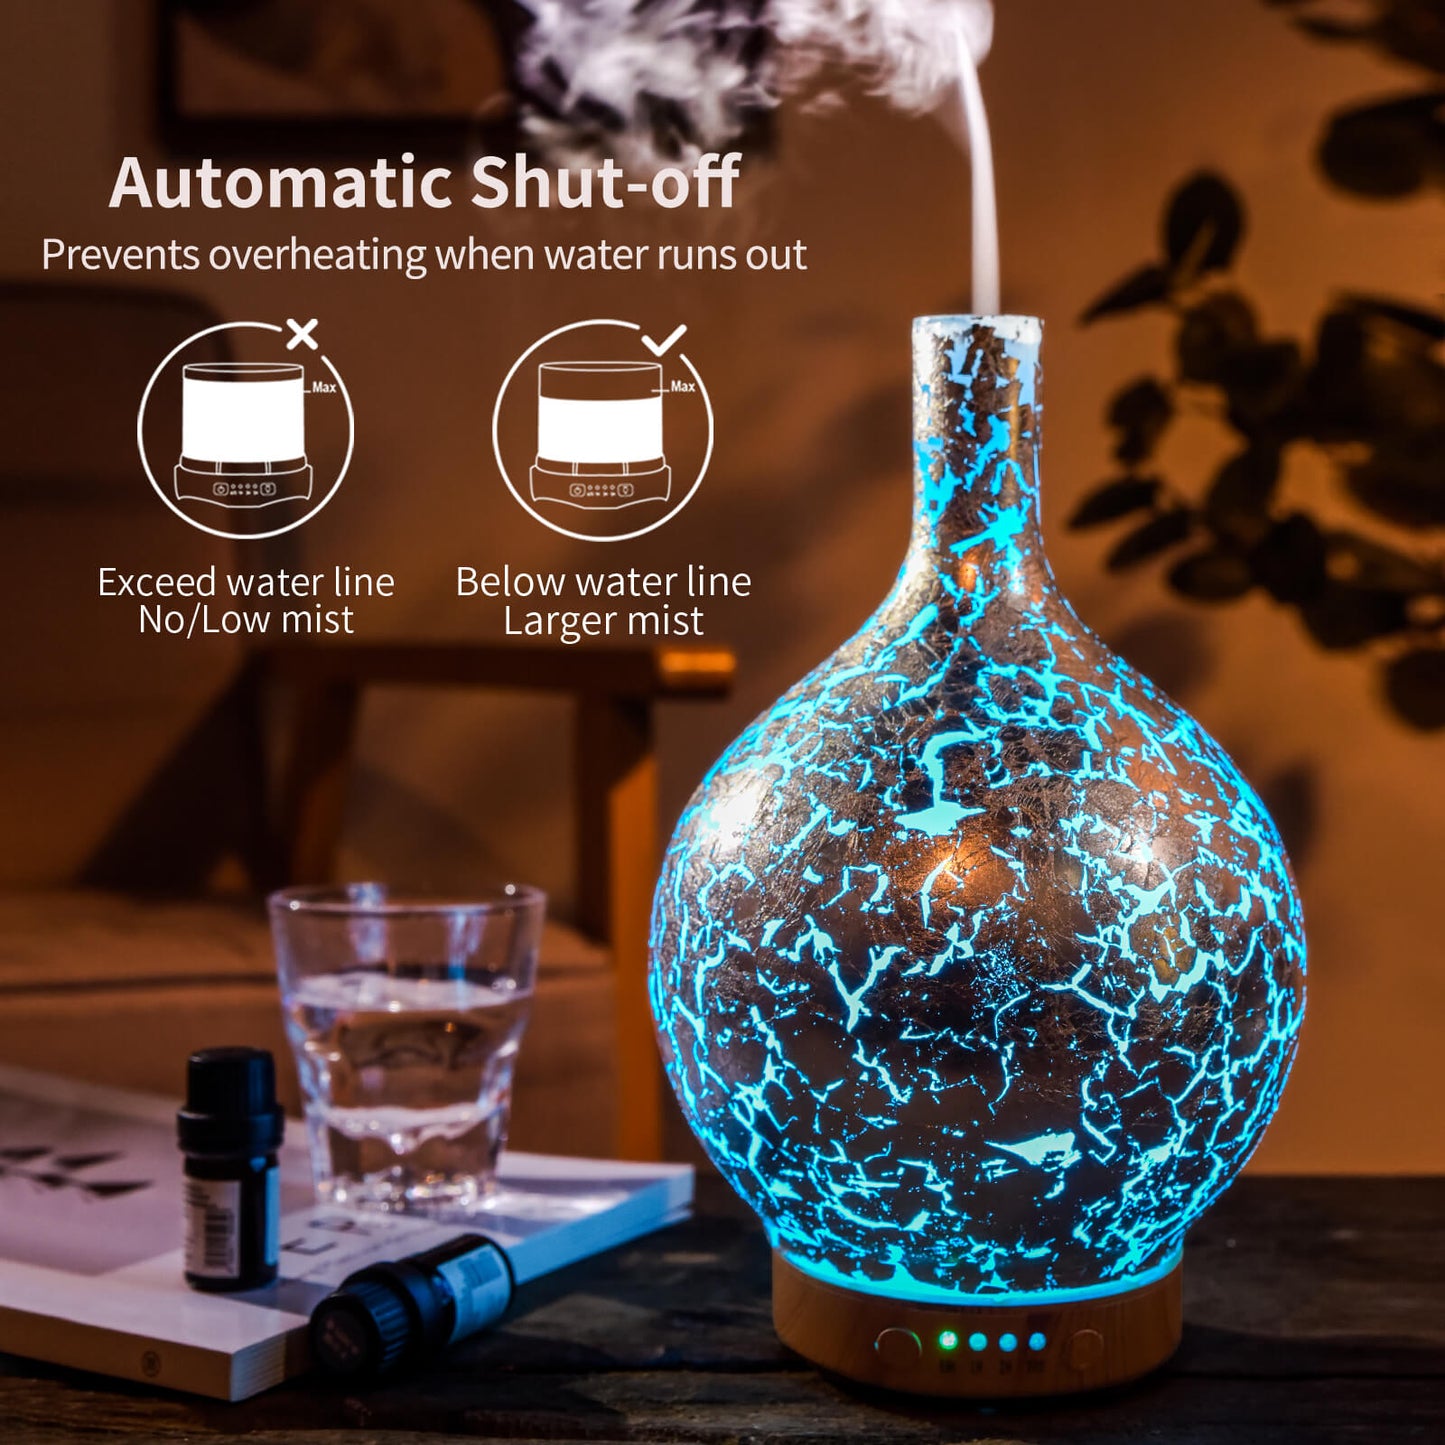 Porseme Silver Plated Essential Oil Diffuser Glass Aromatherapy Ultrasonic Humidifier Cool Mist, Auto Shut-Off,Timer Setting, BPA Free for Home Hotel Yoga Leisure SPA Office Premium Gift 100ml